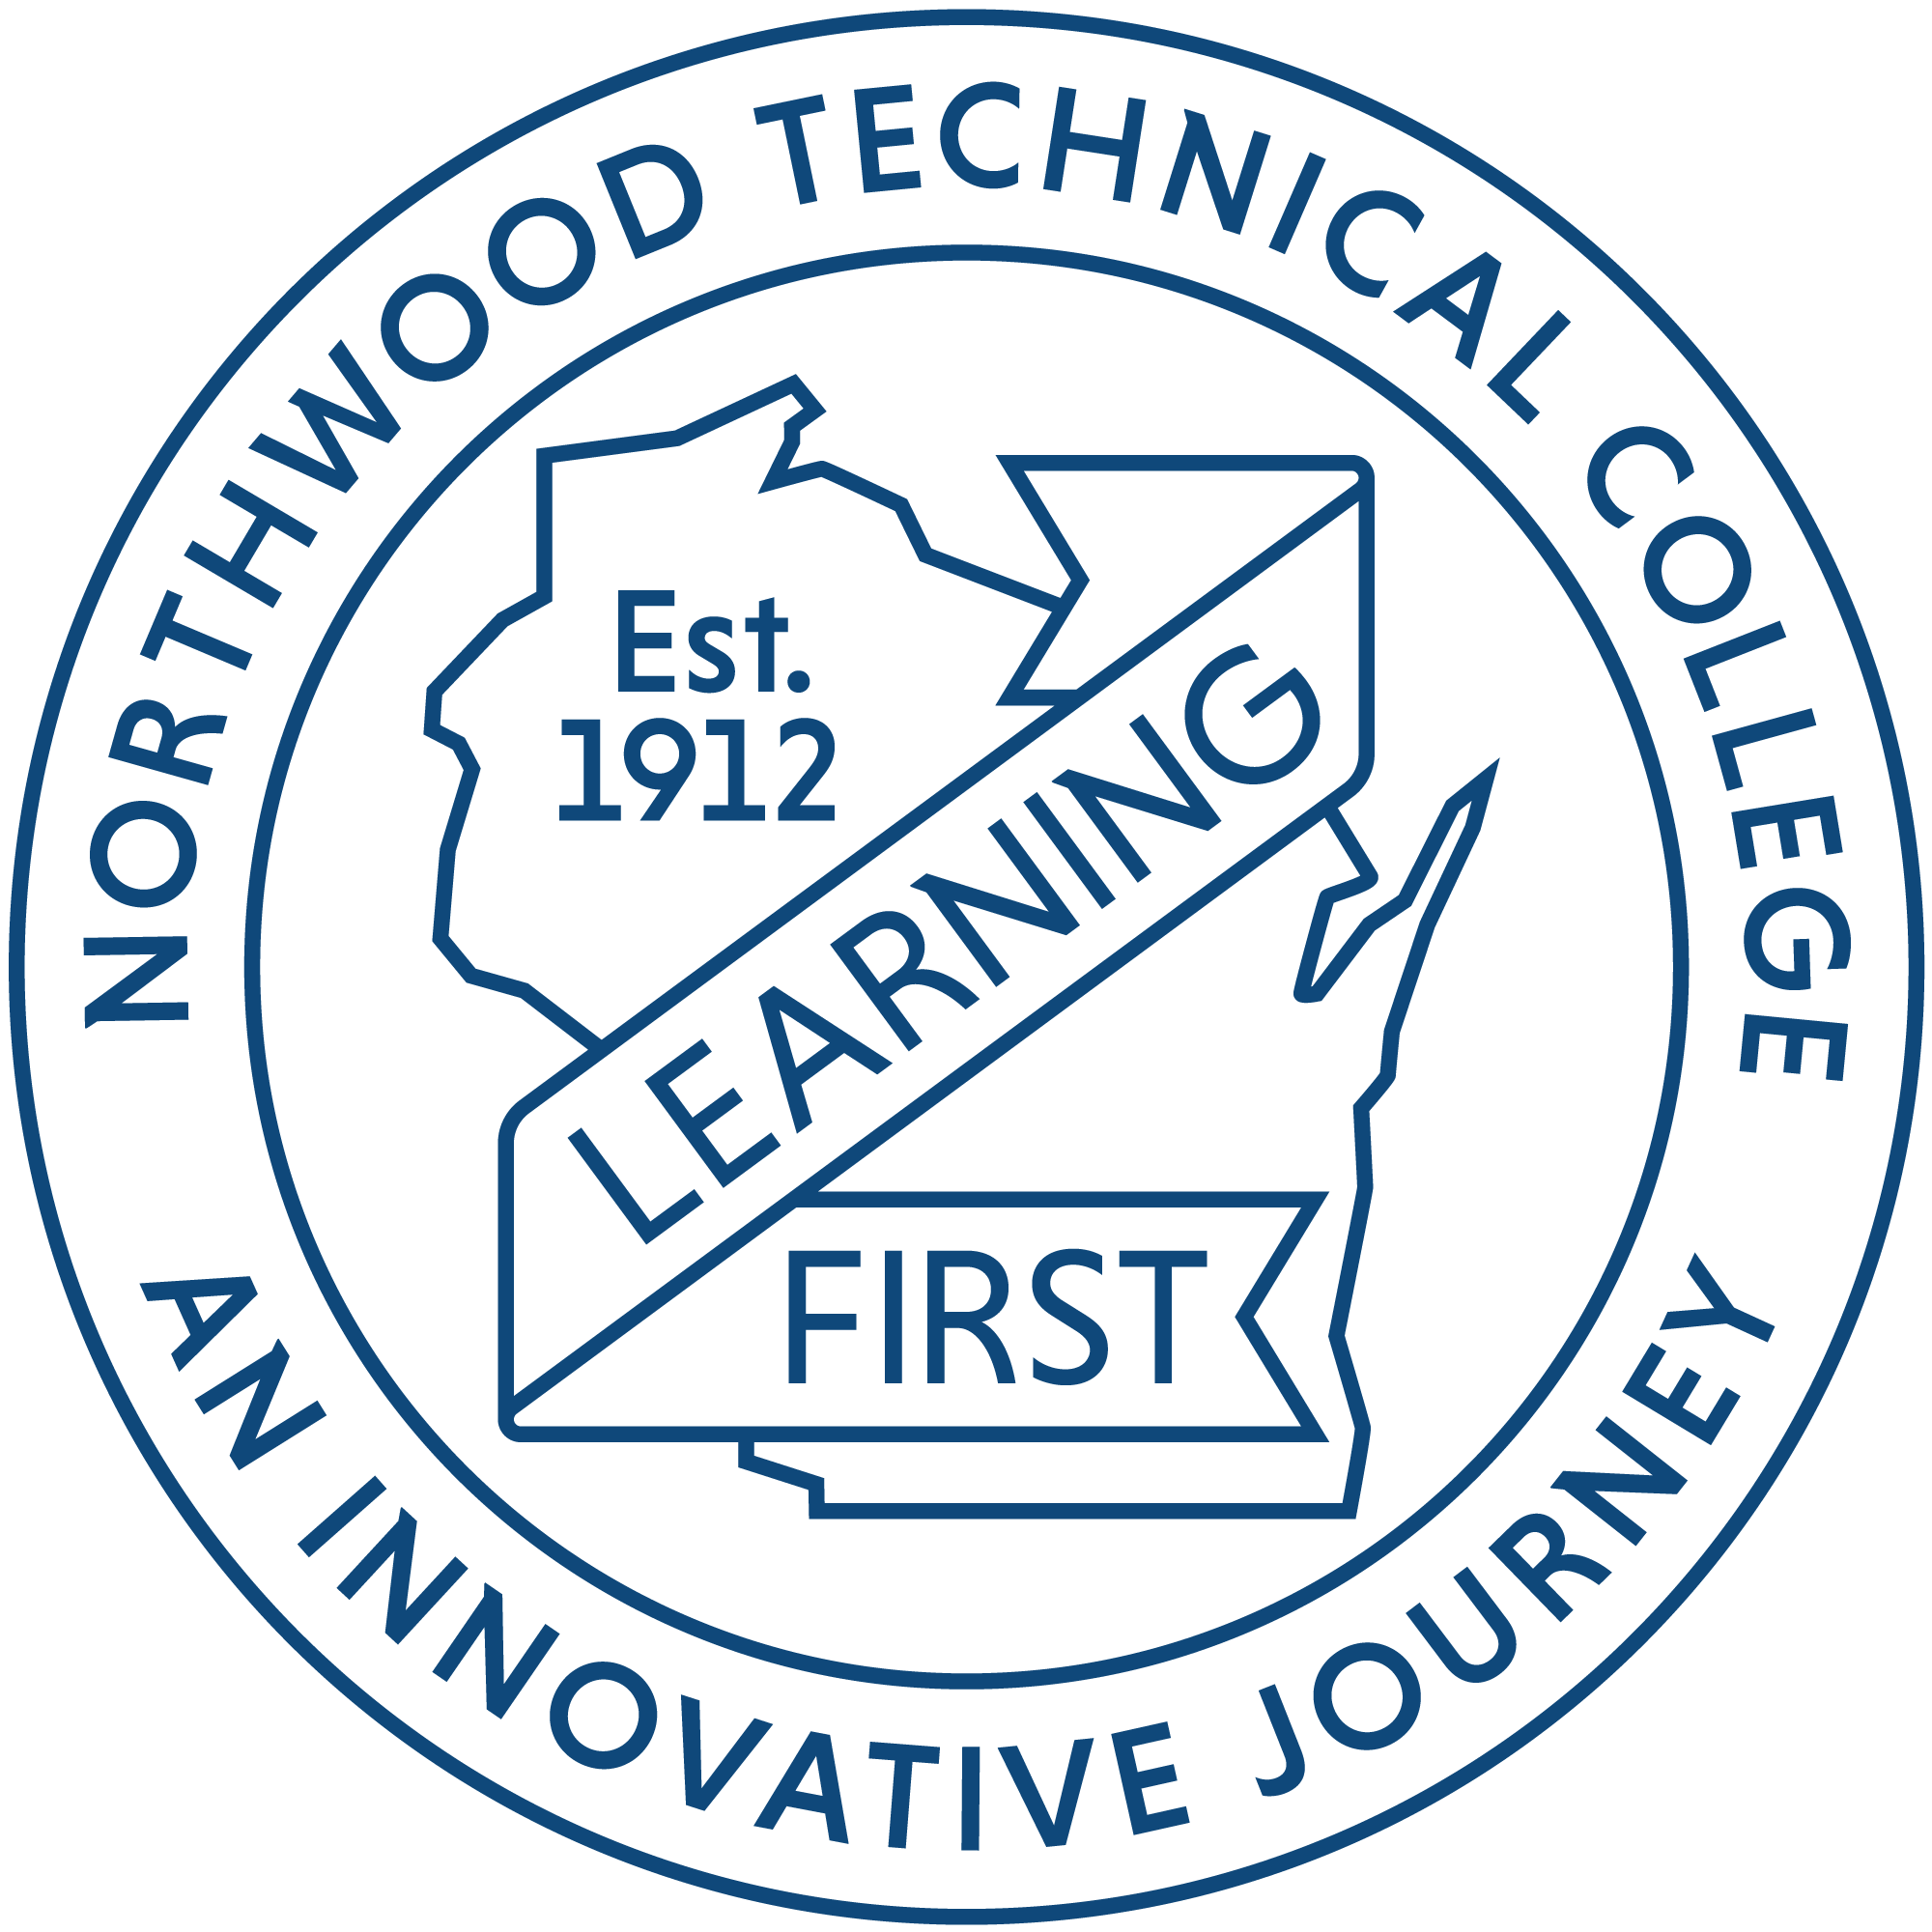 Northwood Technical College Seal